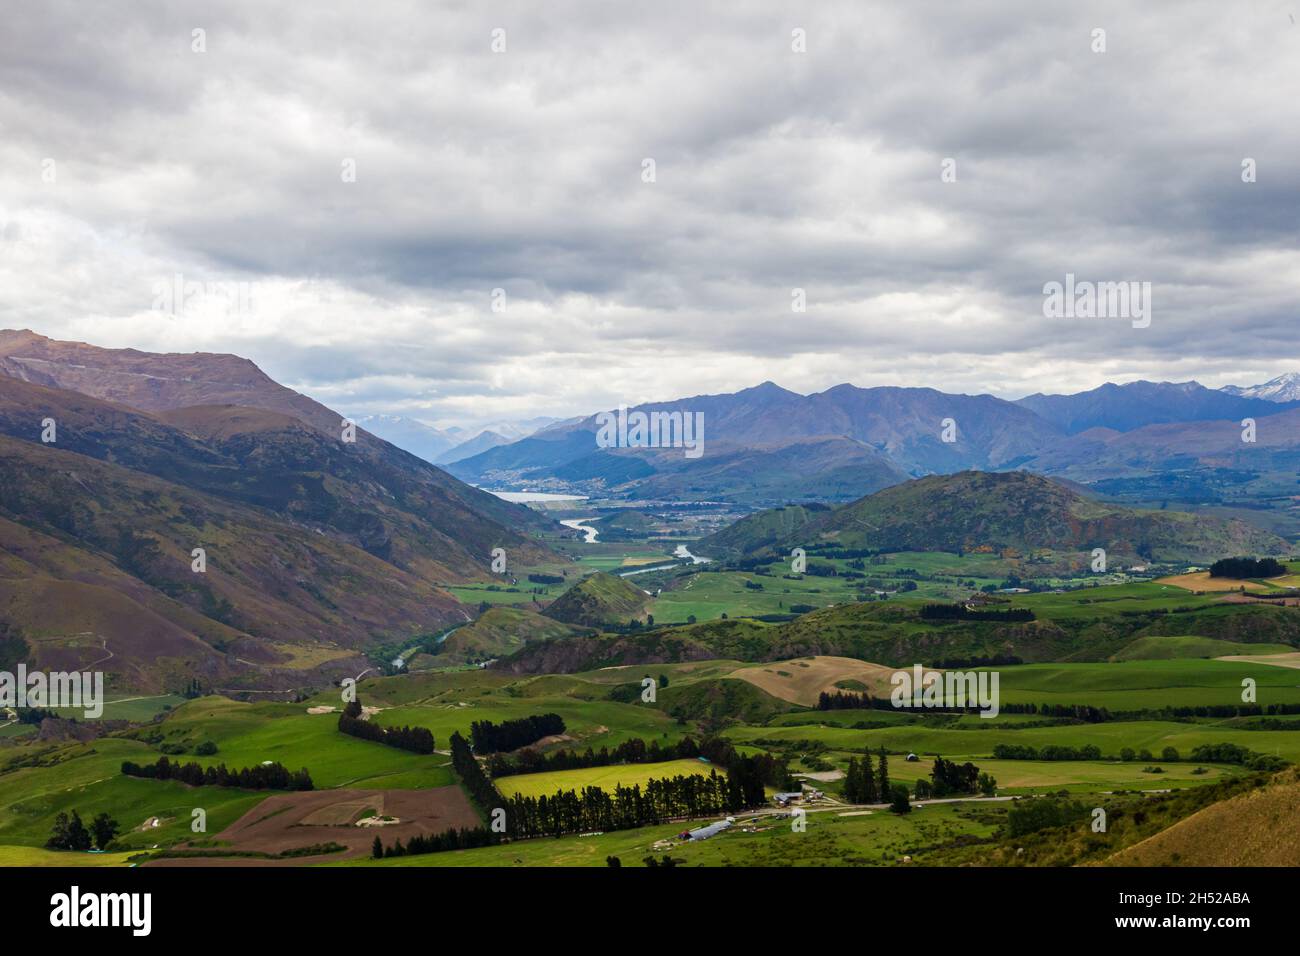 Scenic views of the mountains of the South Island. Queenstown area. New Zealand Stock Photo